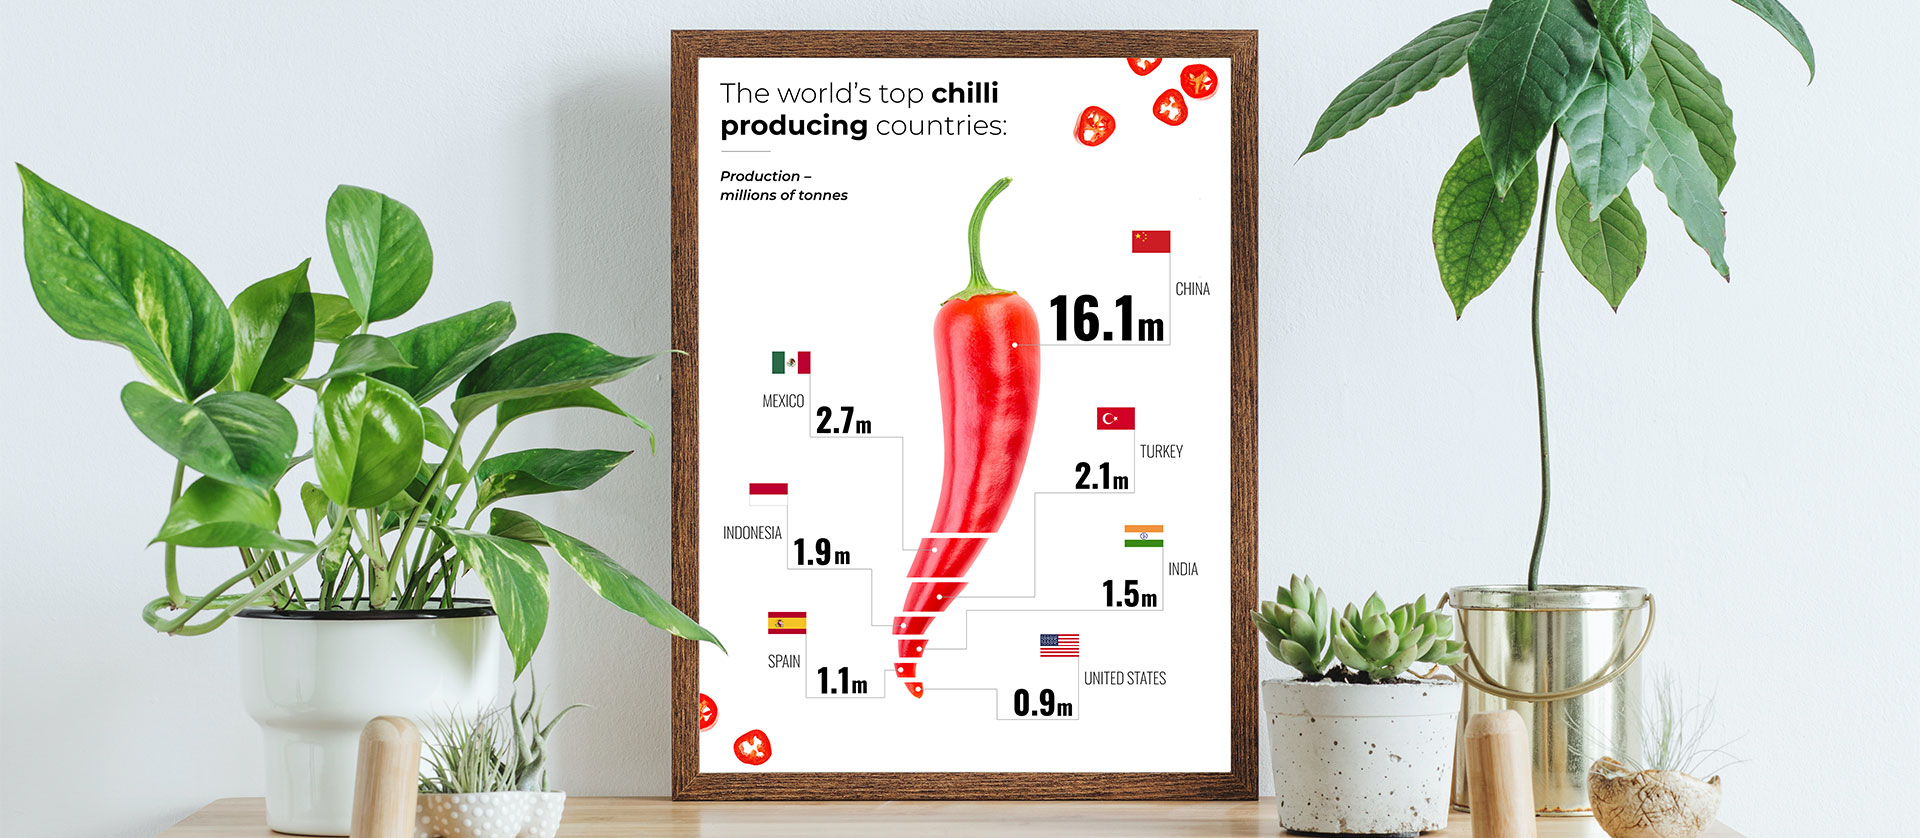 Chilli Infographic Design by Buffalo 7